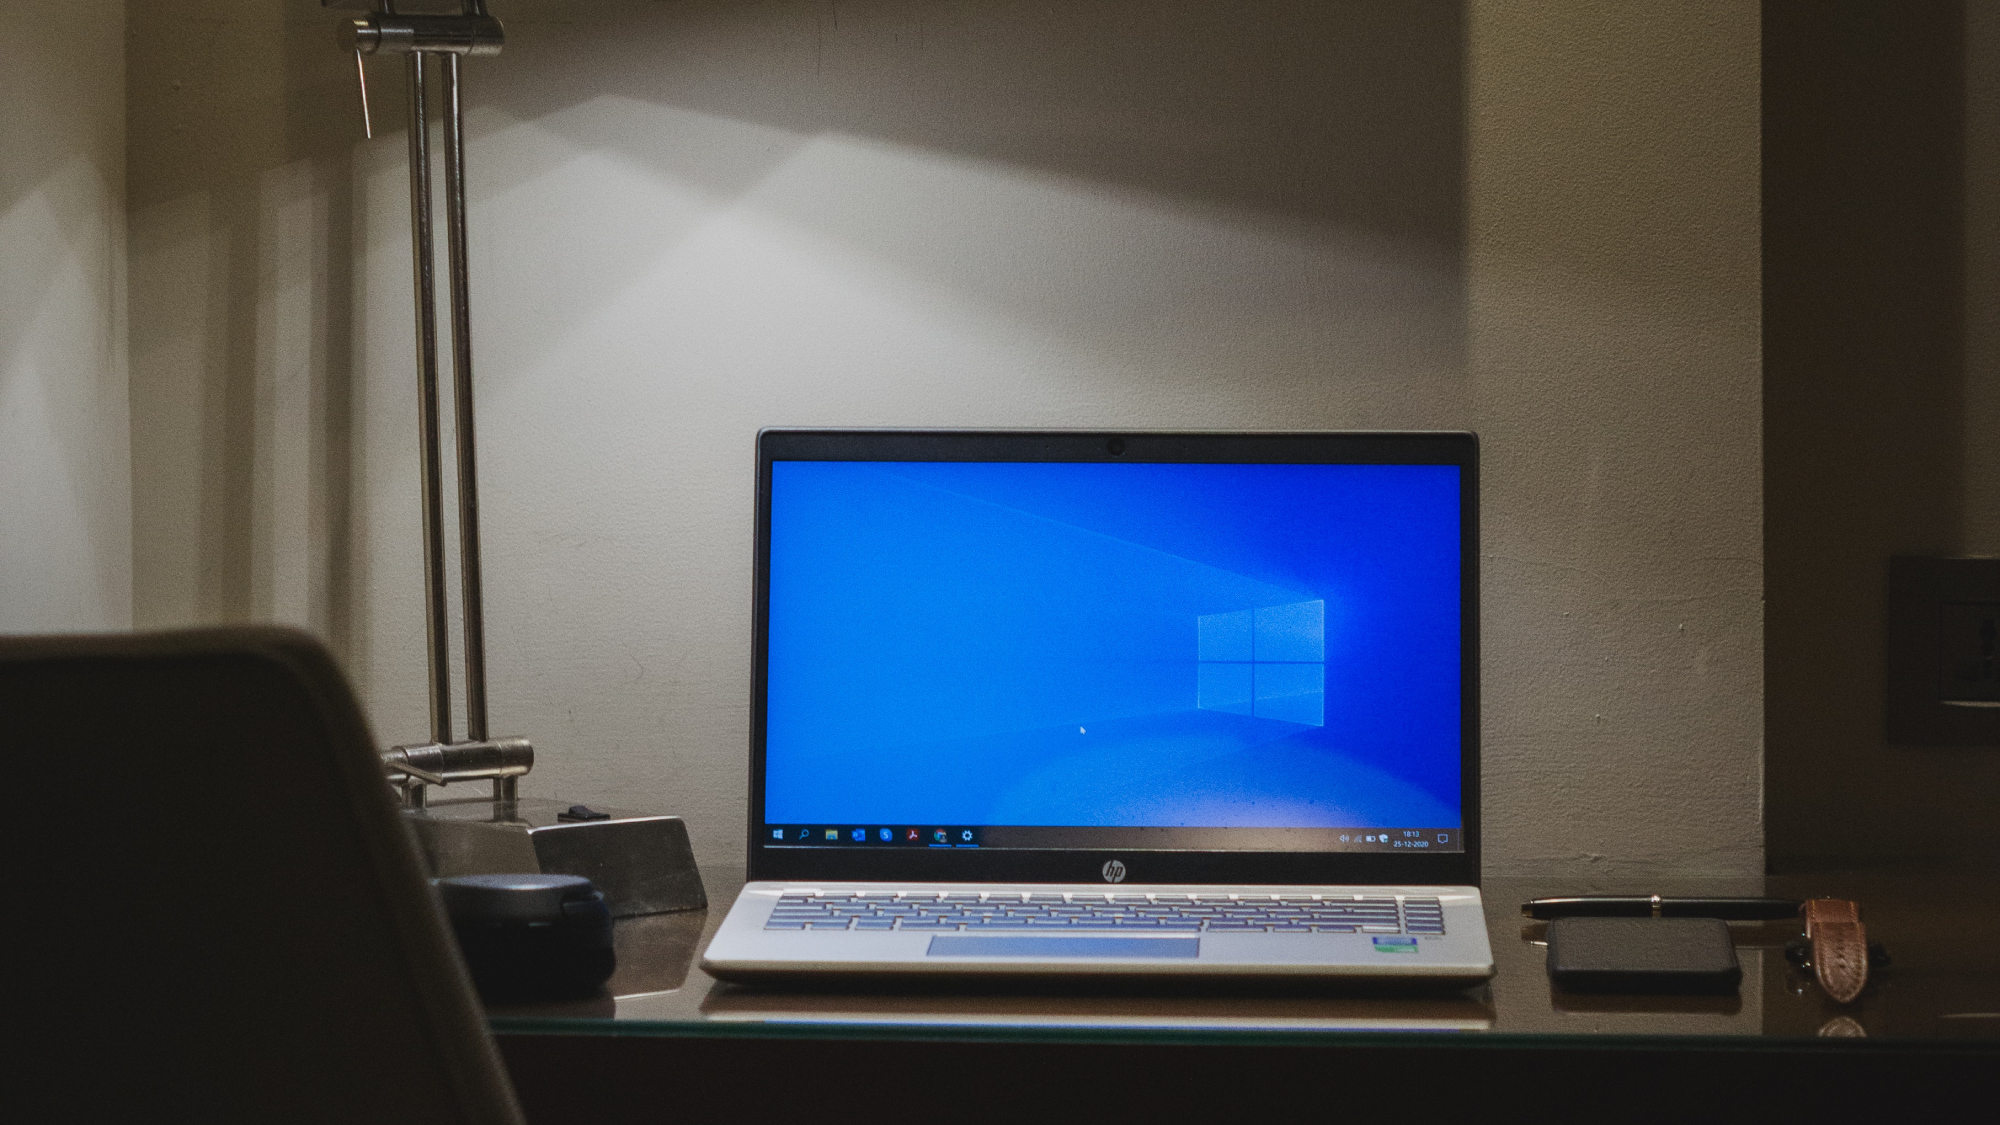 A Windows 10 laptop on a desk under a desk lamp, with the Windows desktop on the screen.